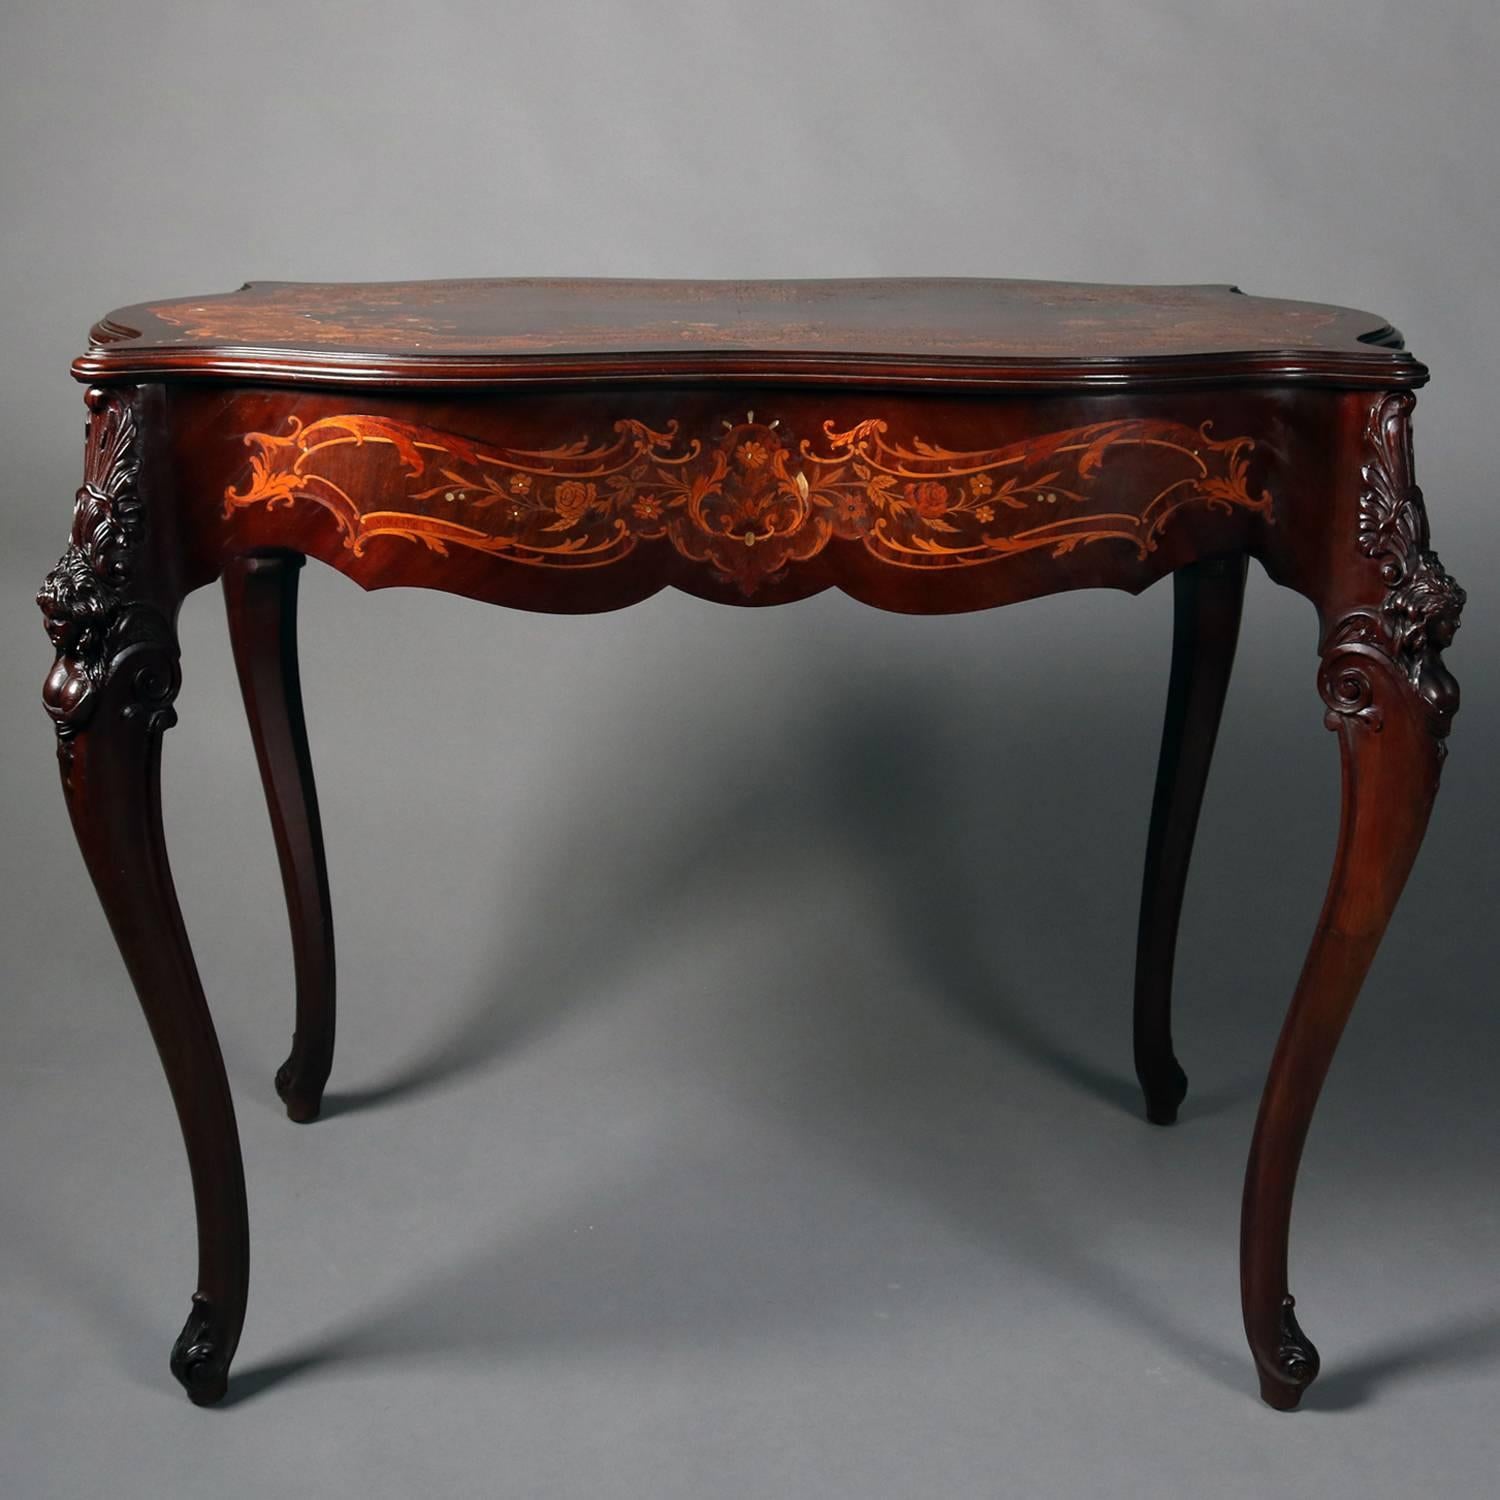 19th Century Antique French Louis XV Carved Mahogany Marquetry Inlaid Center Table